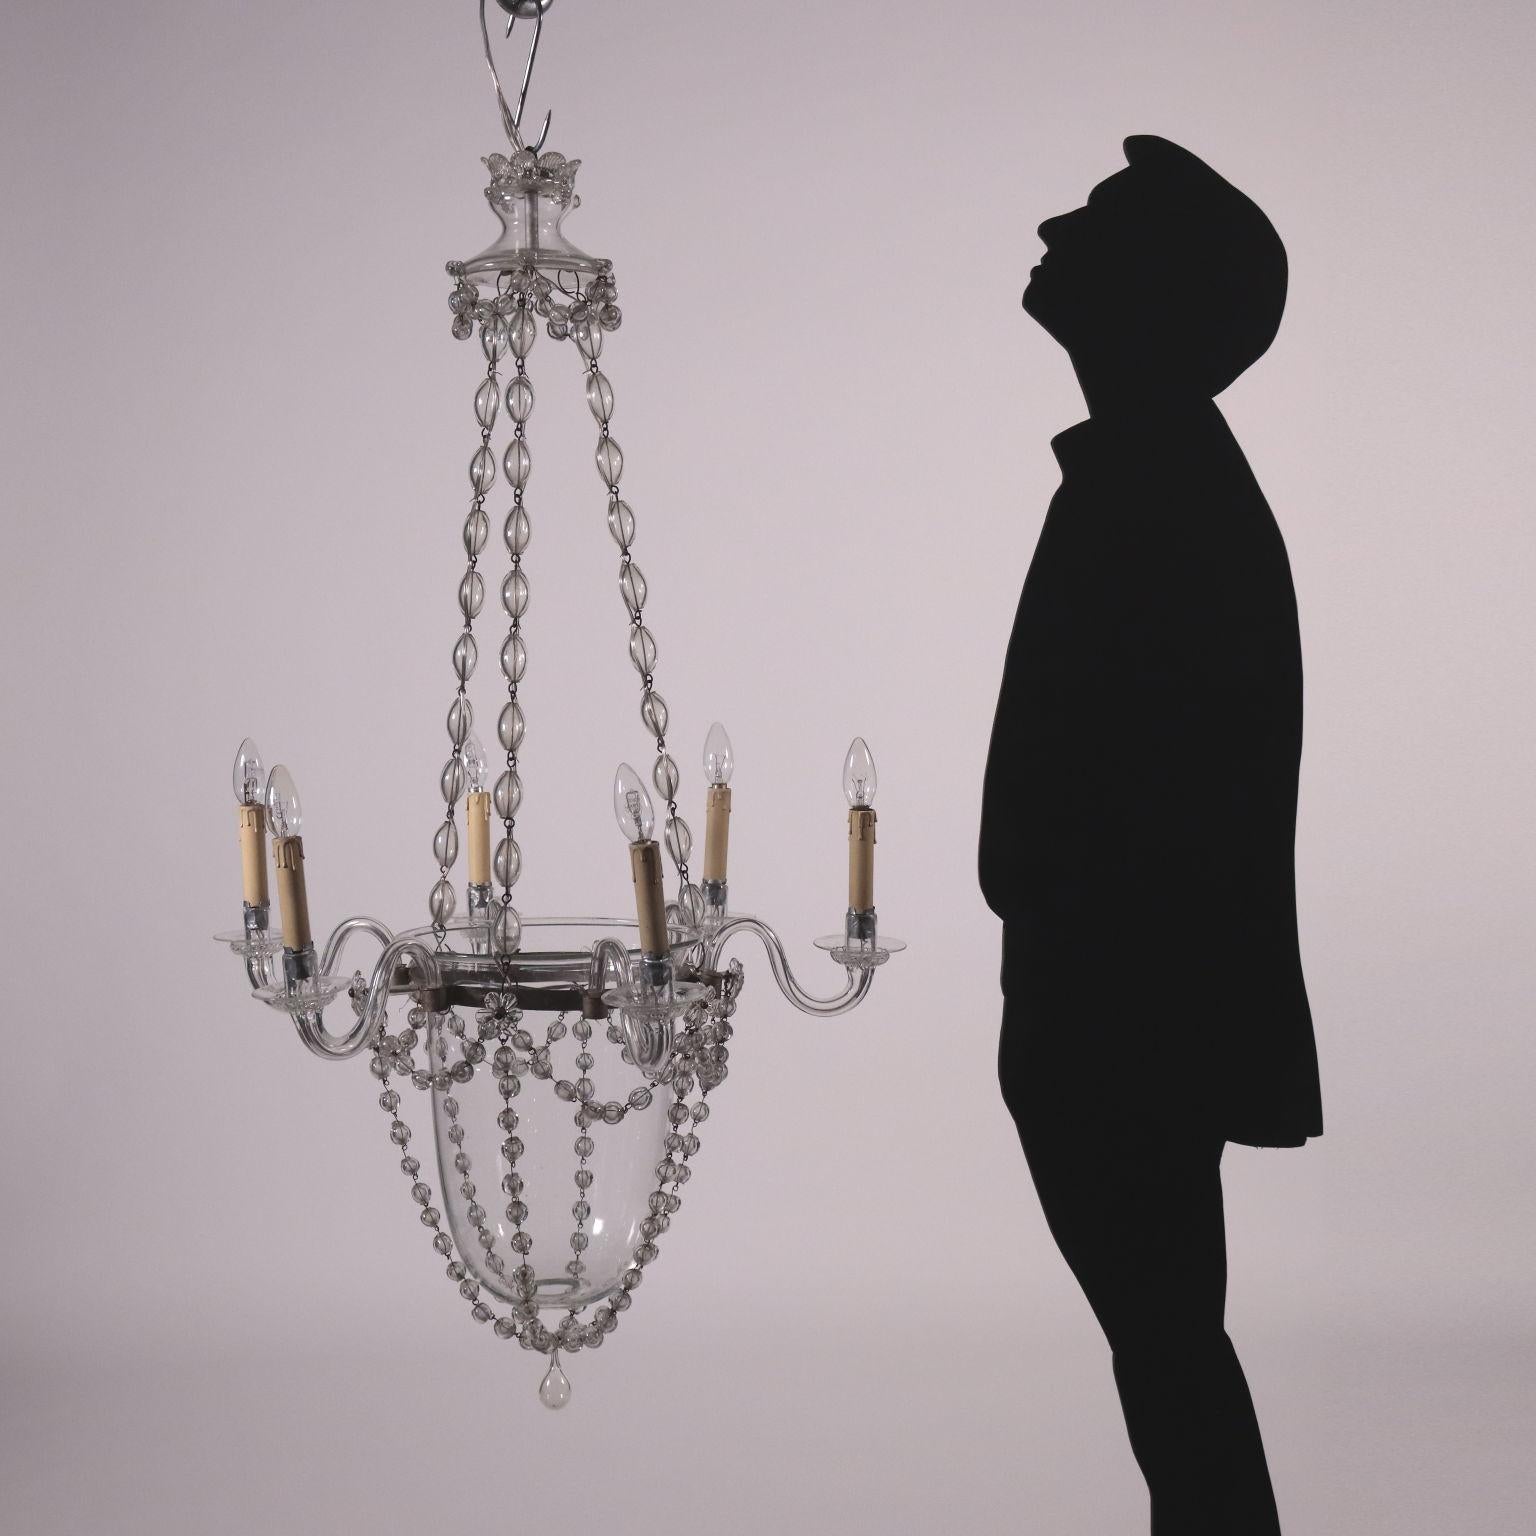 Chandelier from the late 19th century with six lights, with an inverted glass bell in the centre, decorated with necklaces with blown glass beads.